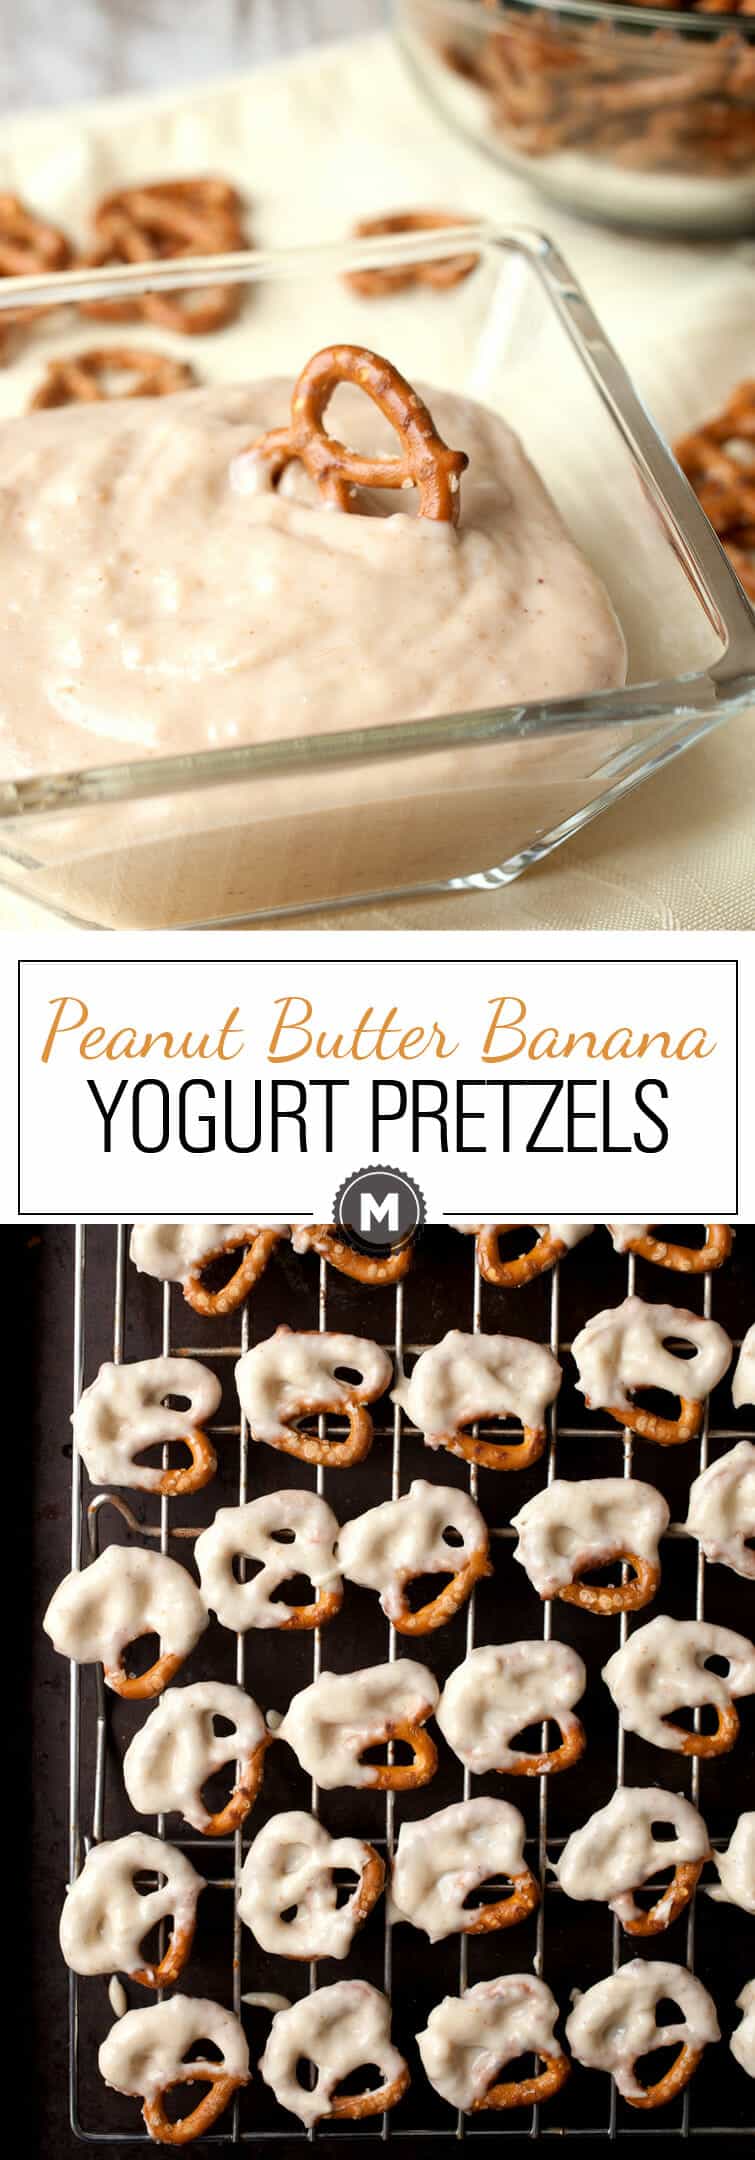 Peanut Butter Banana Yogurt Pretzels: A quick and easy 4-ingredient pretzel dip that's just sweet enough to be super-addictive. A great easy snack for kids, but adults will love the sweet and salty combo as well! | macheesmo.com